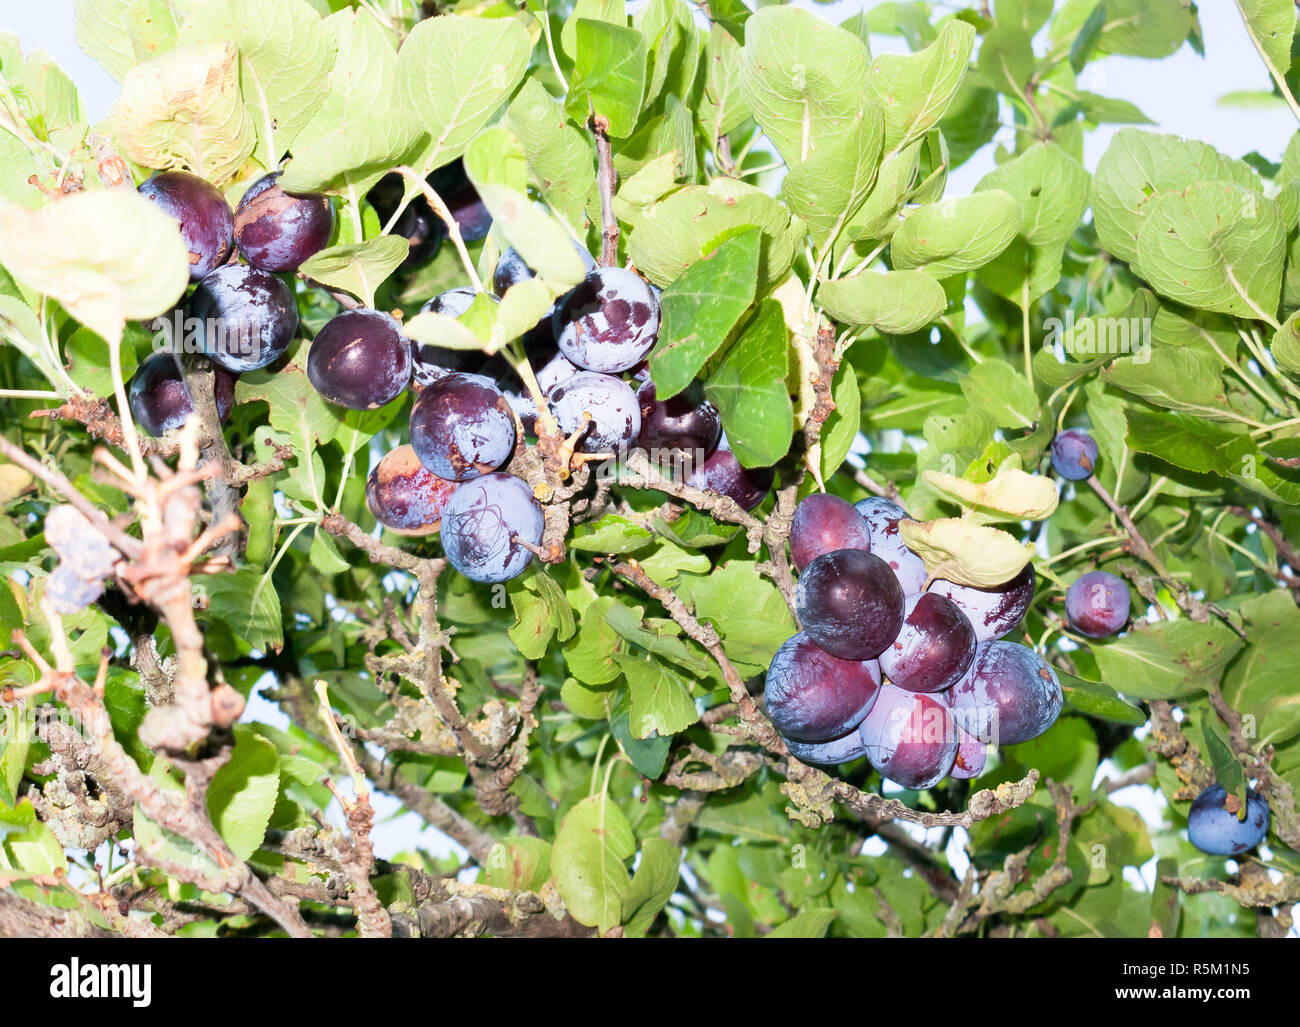 plums growing wild on a tree seen from below Stock Photo